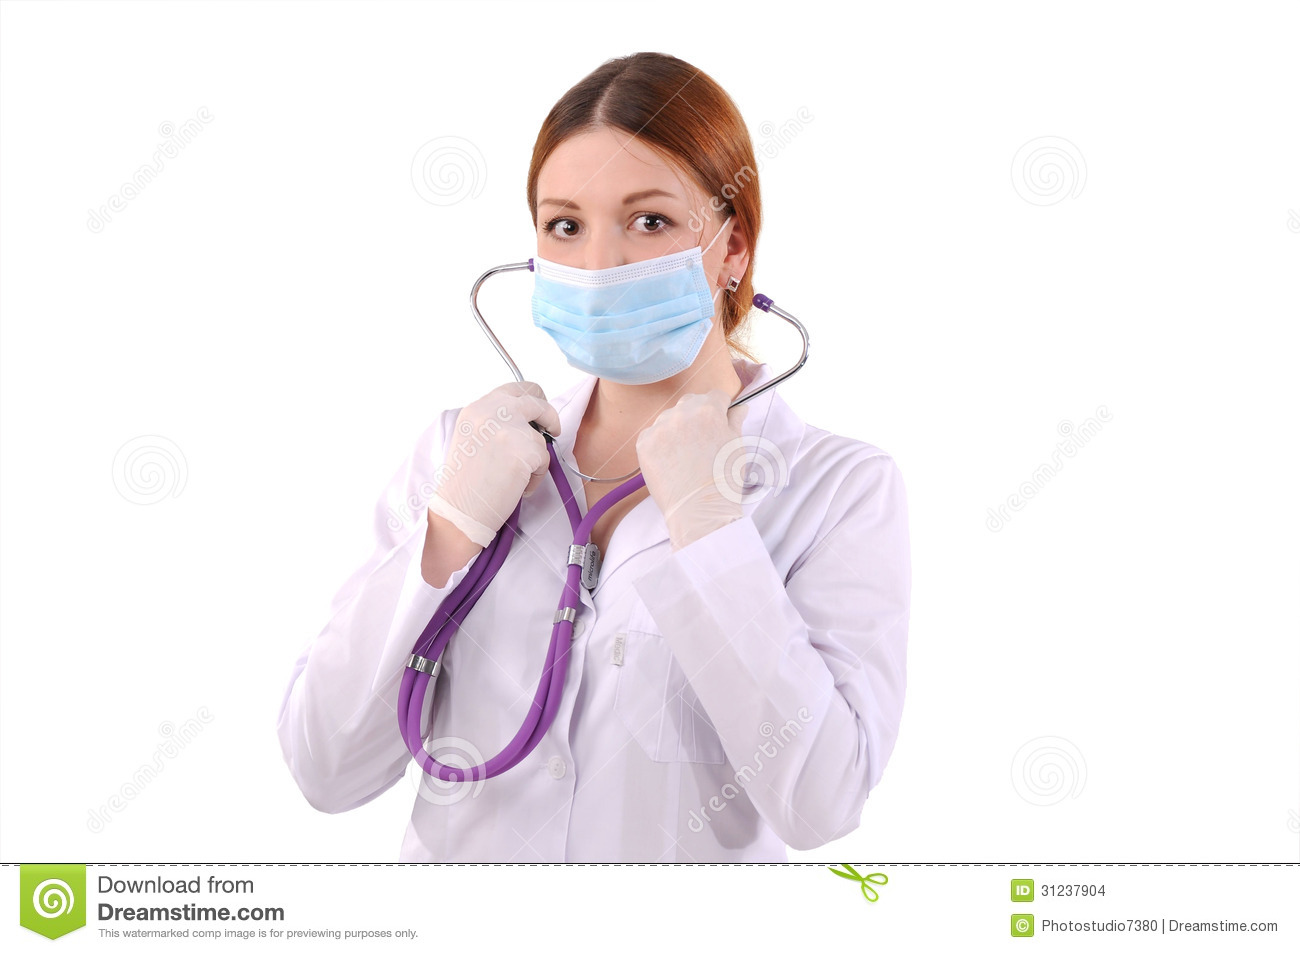 Nurse In A White Coat And Mask